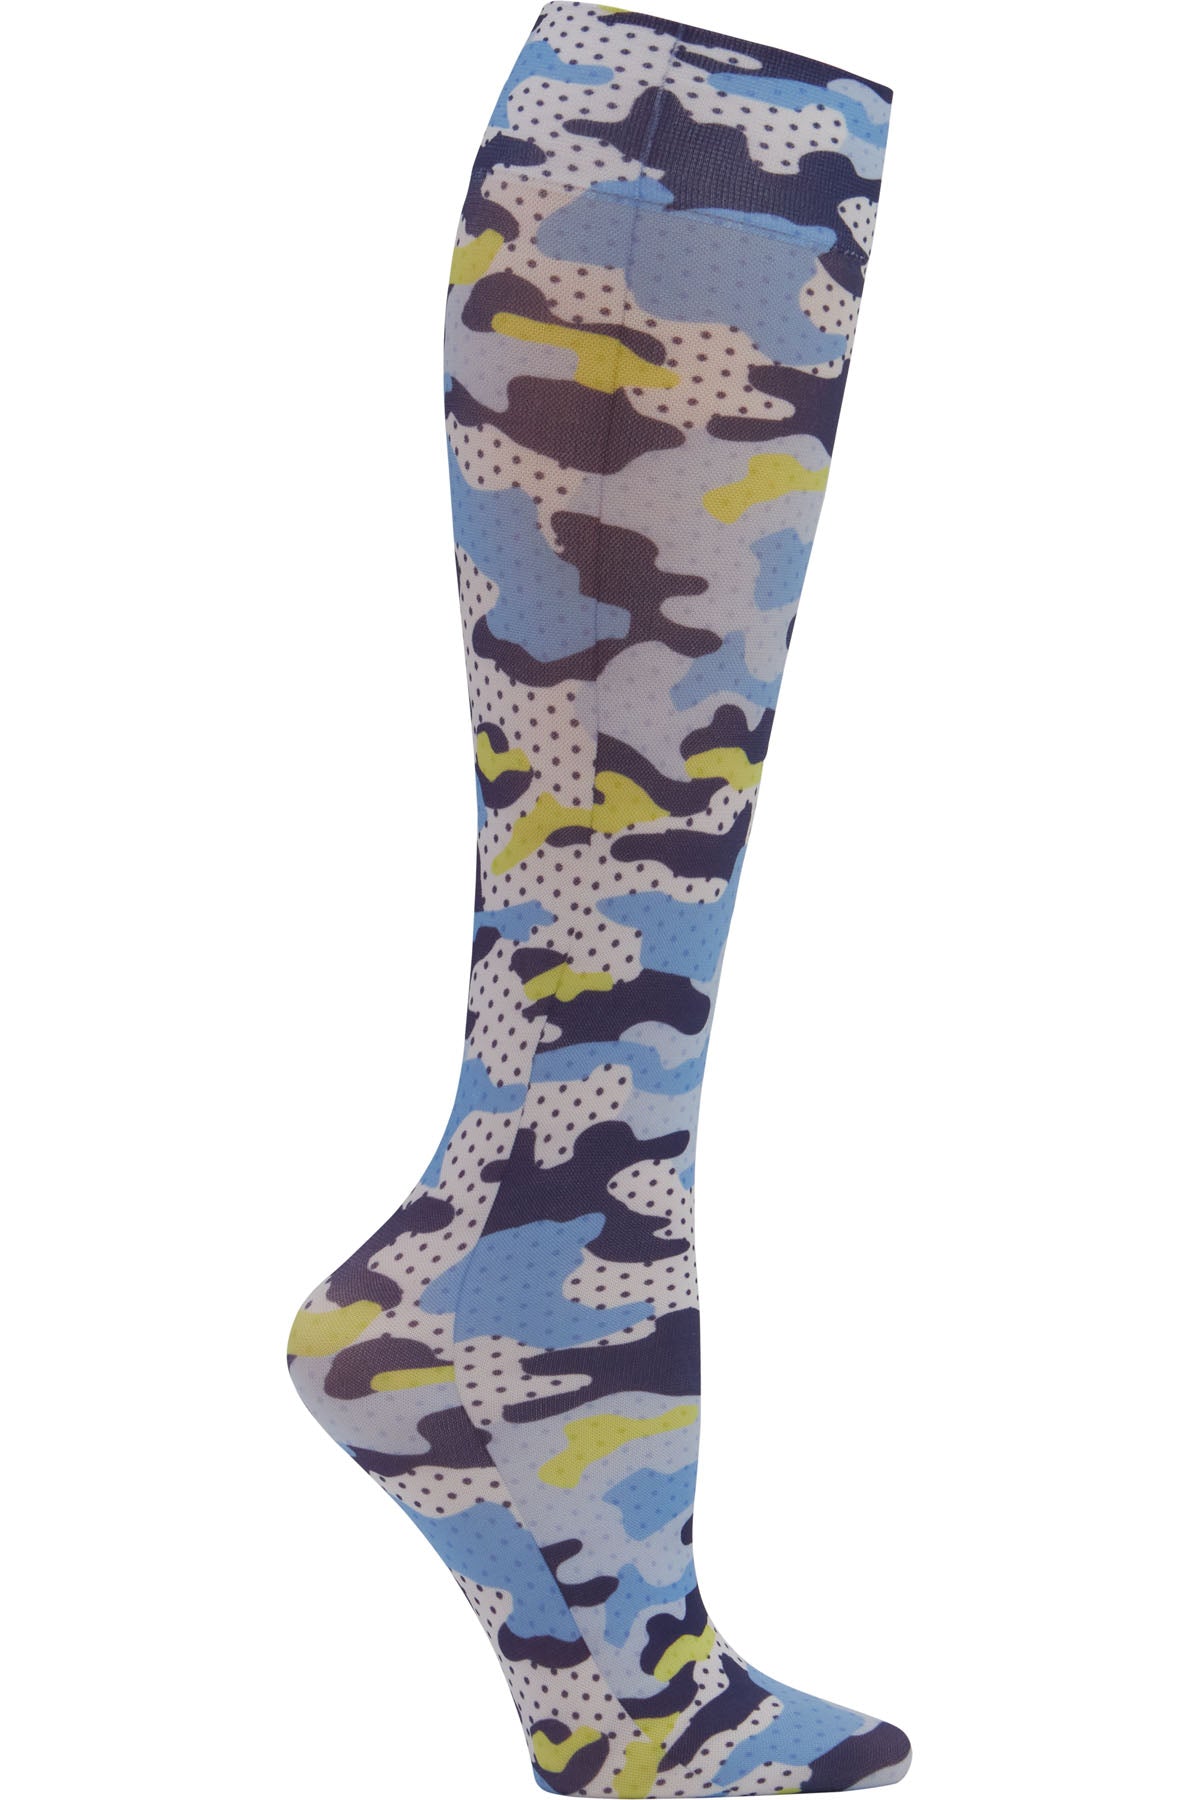 Cherokee Fashion Support Mild Compression Socks 8-15 mmHG Polka Dot Camo at Parker's Clothing and Shoes.